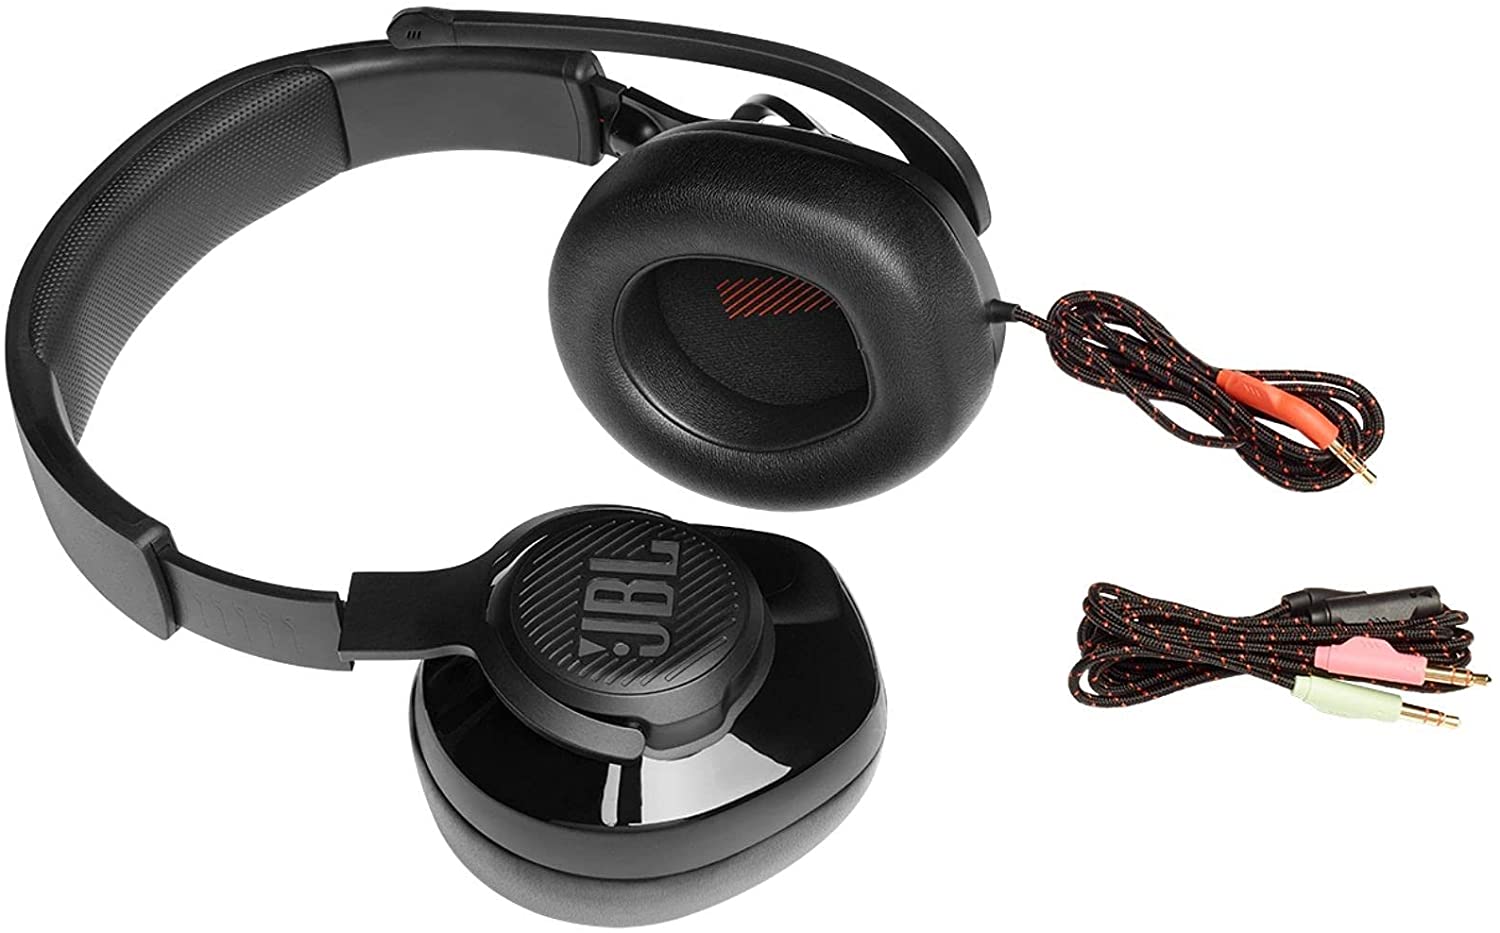 JBL Quantum 200 Wired Over Ear Gaming Headphones